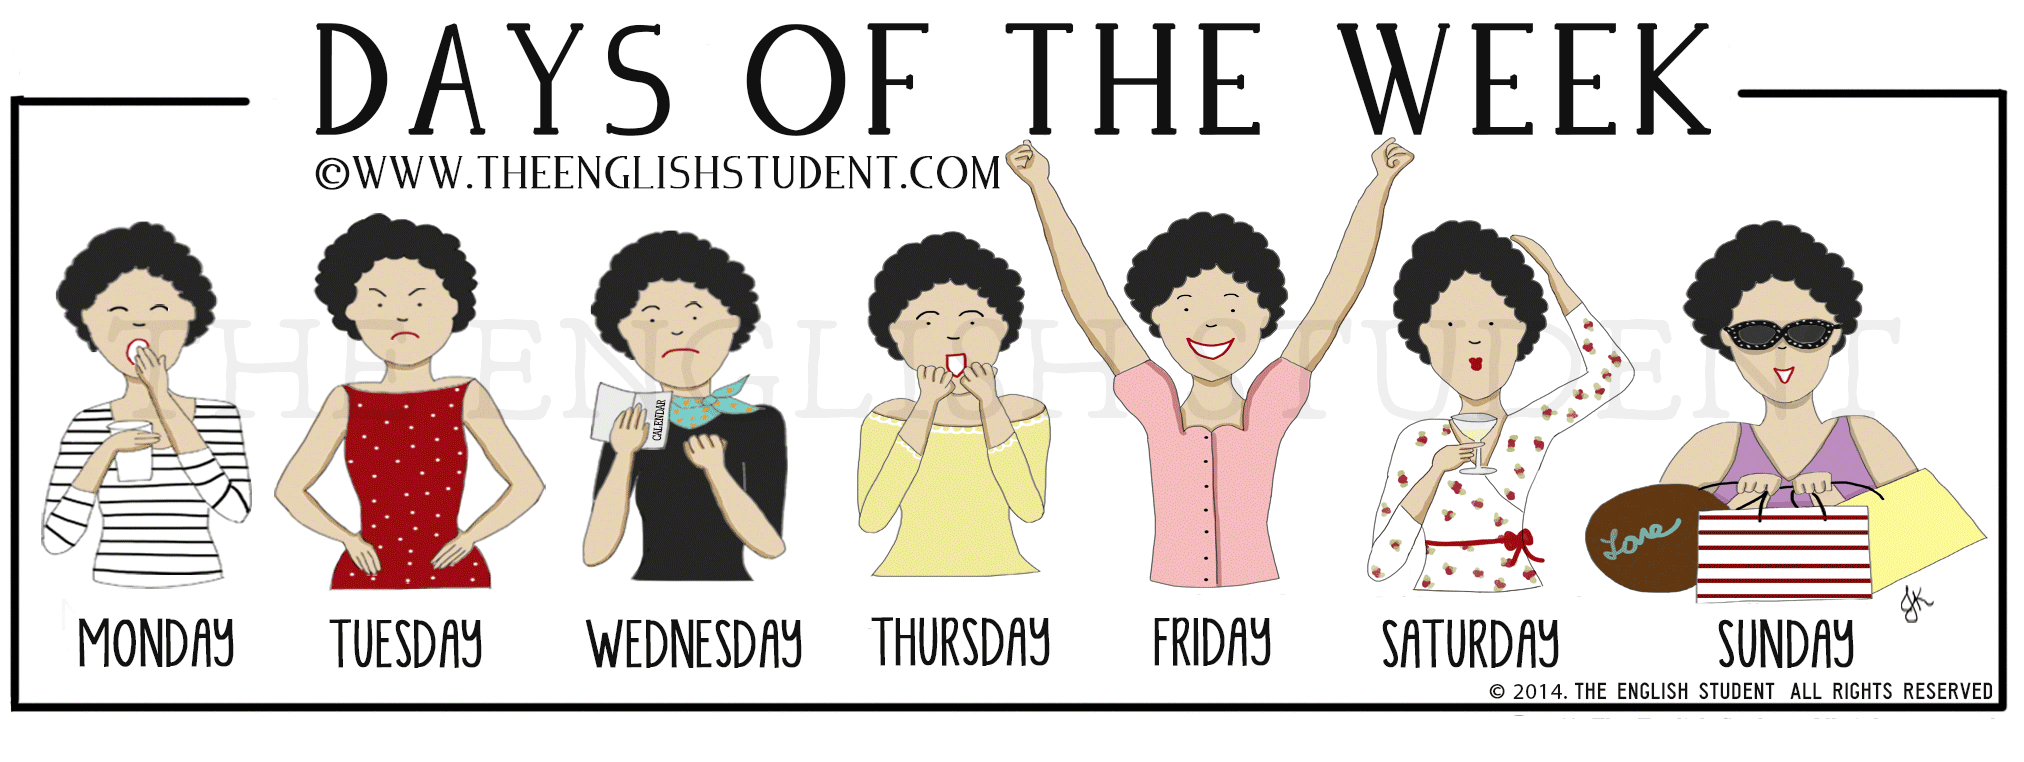 The English Student Days of The Week ESL Illustration 